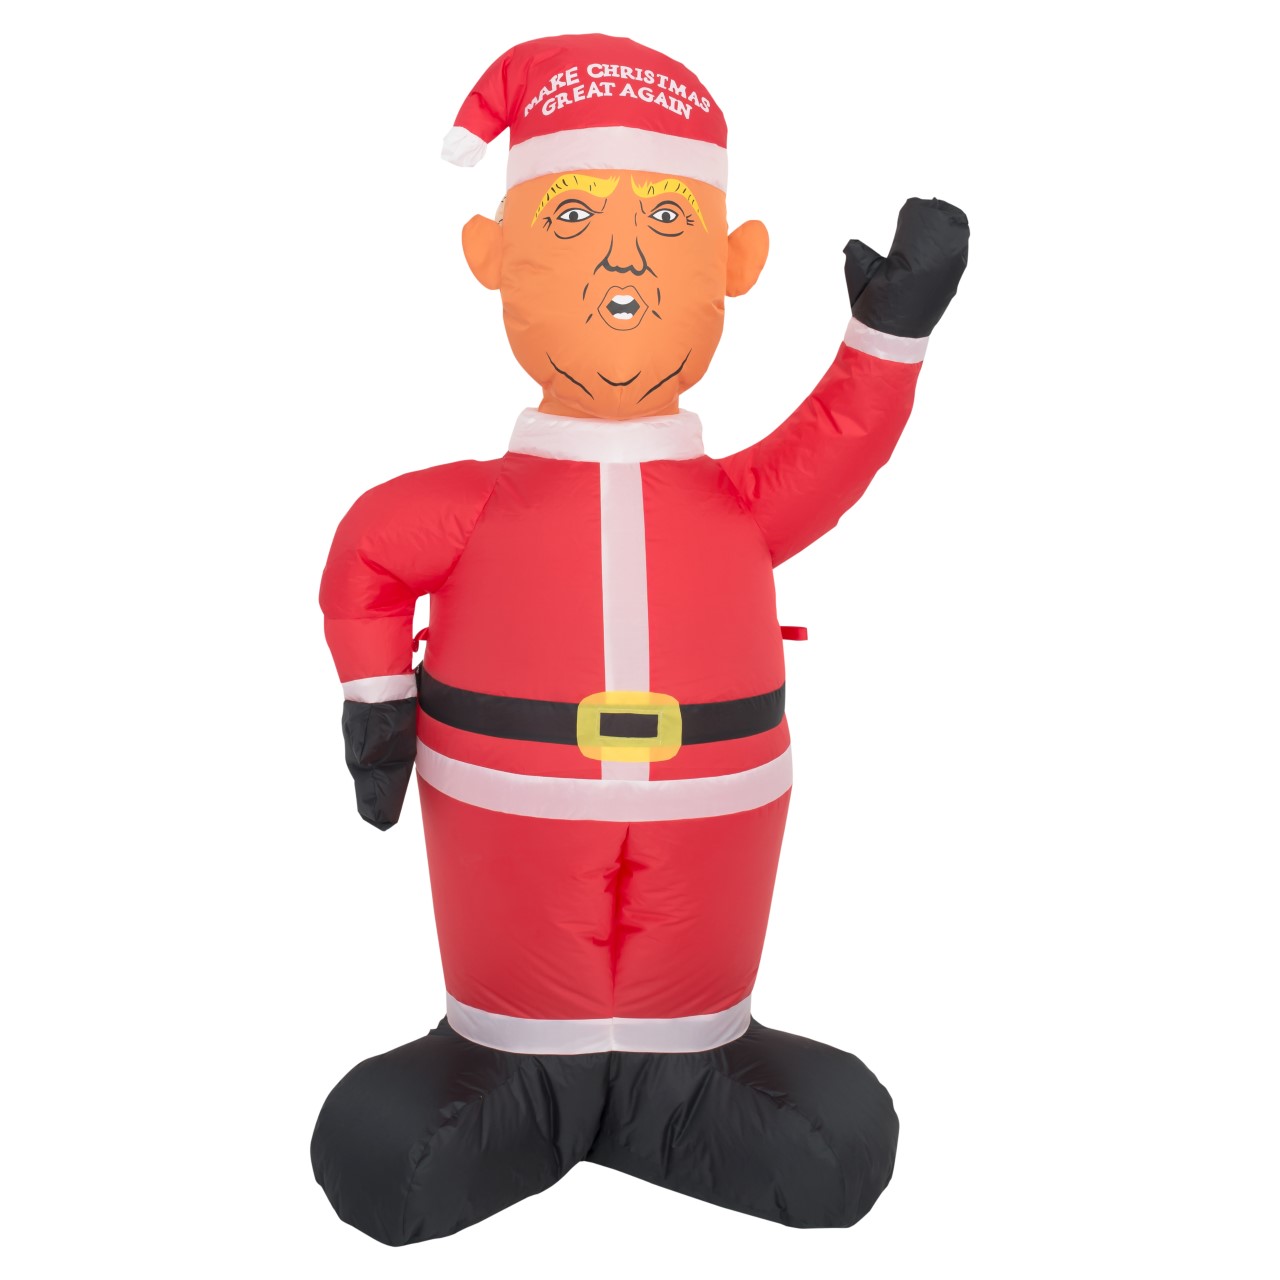 Donald Trump Make Christmas Great Again Lawn Inflatable,New Products : uglyschristmassweater.com